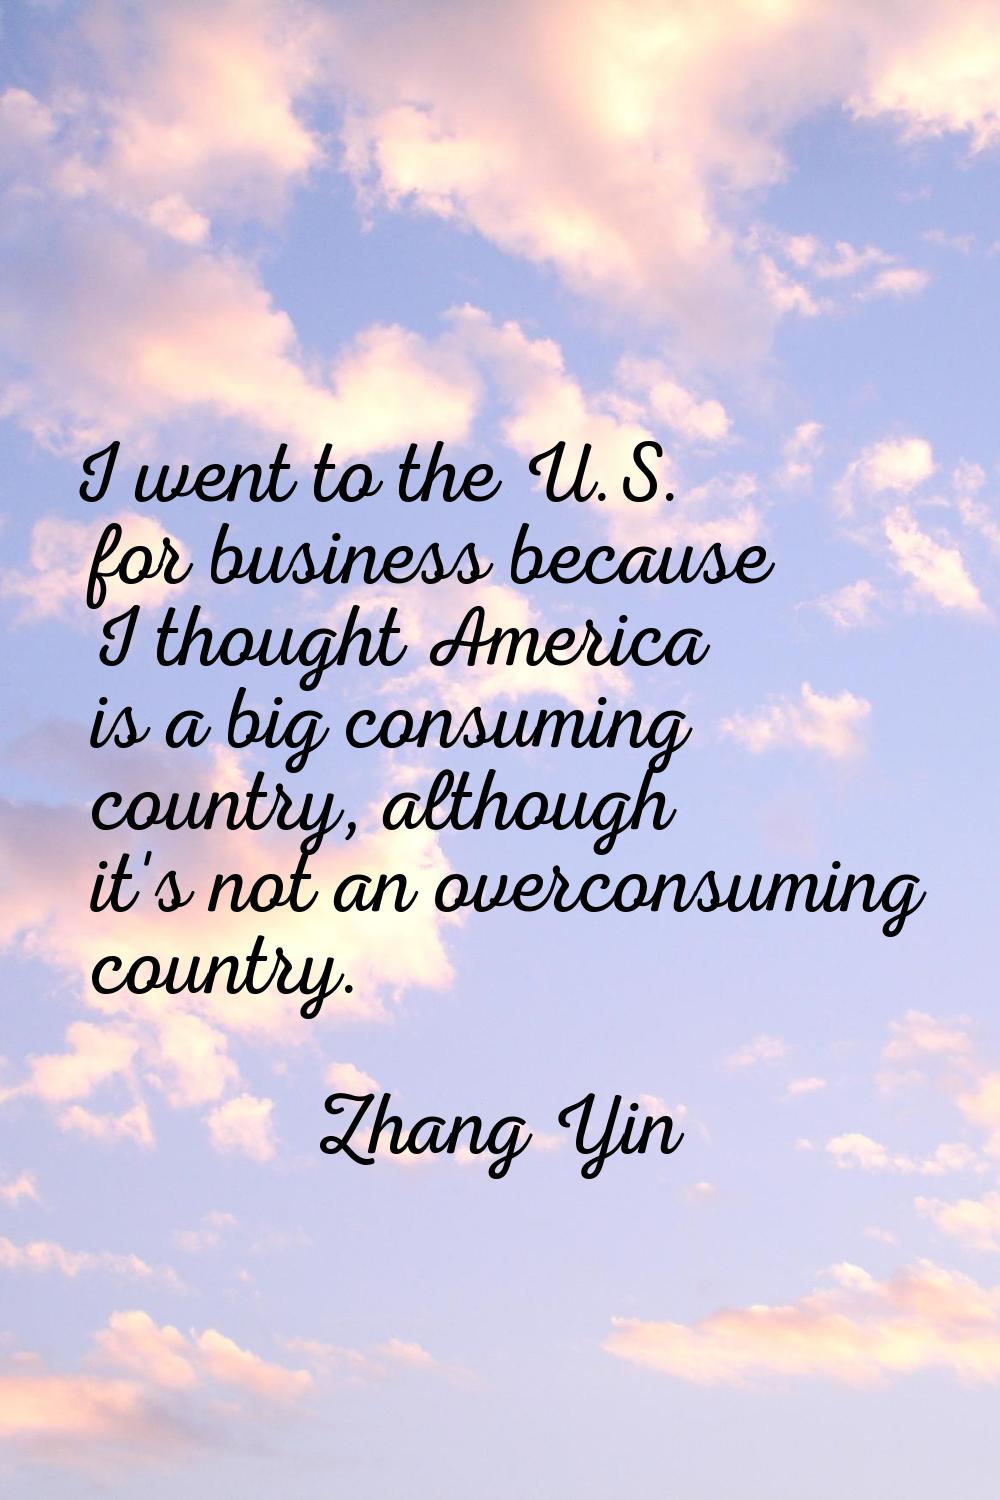 I went to the U.S. for business because I thought America is a big consuming country, although it's